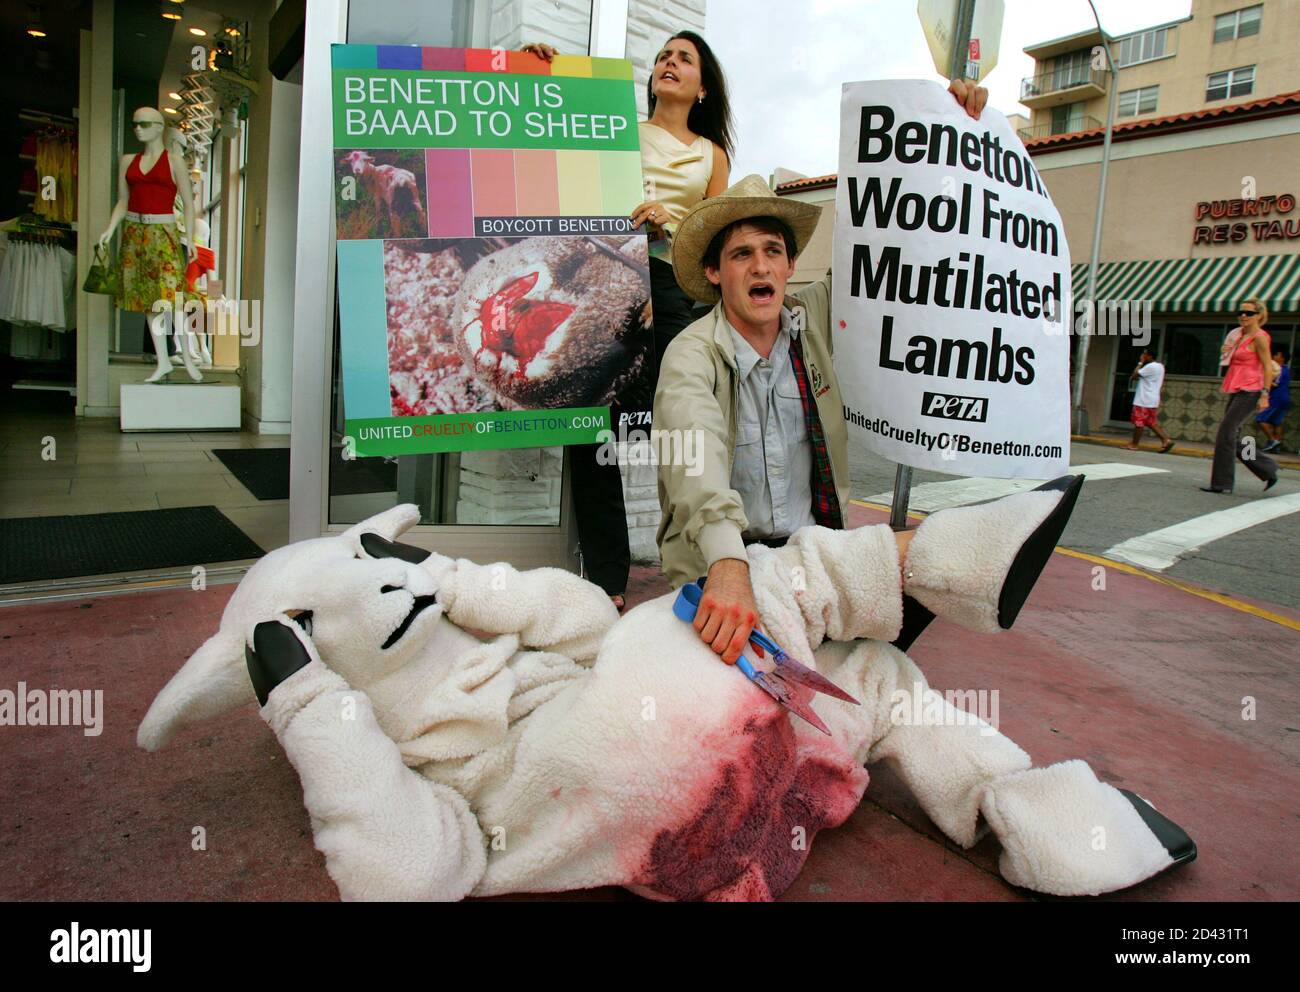 Members of PETA (People for the Ethical Treatment of Animals) protest in  front of a Benetton store against the 'Mulesing', a mutilation of sheep  used by Australian farmers at the wool industry,